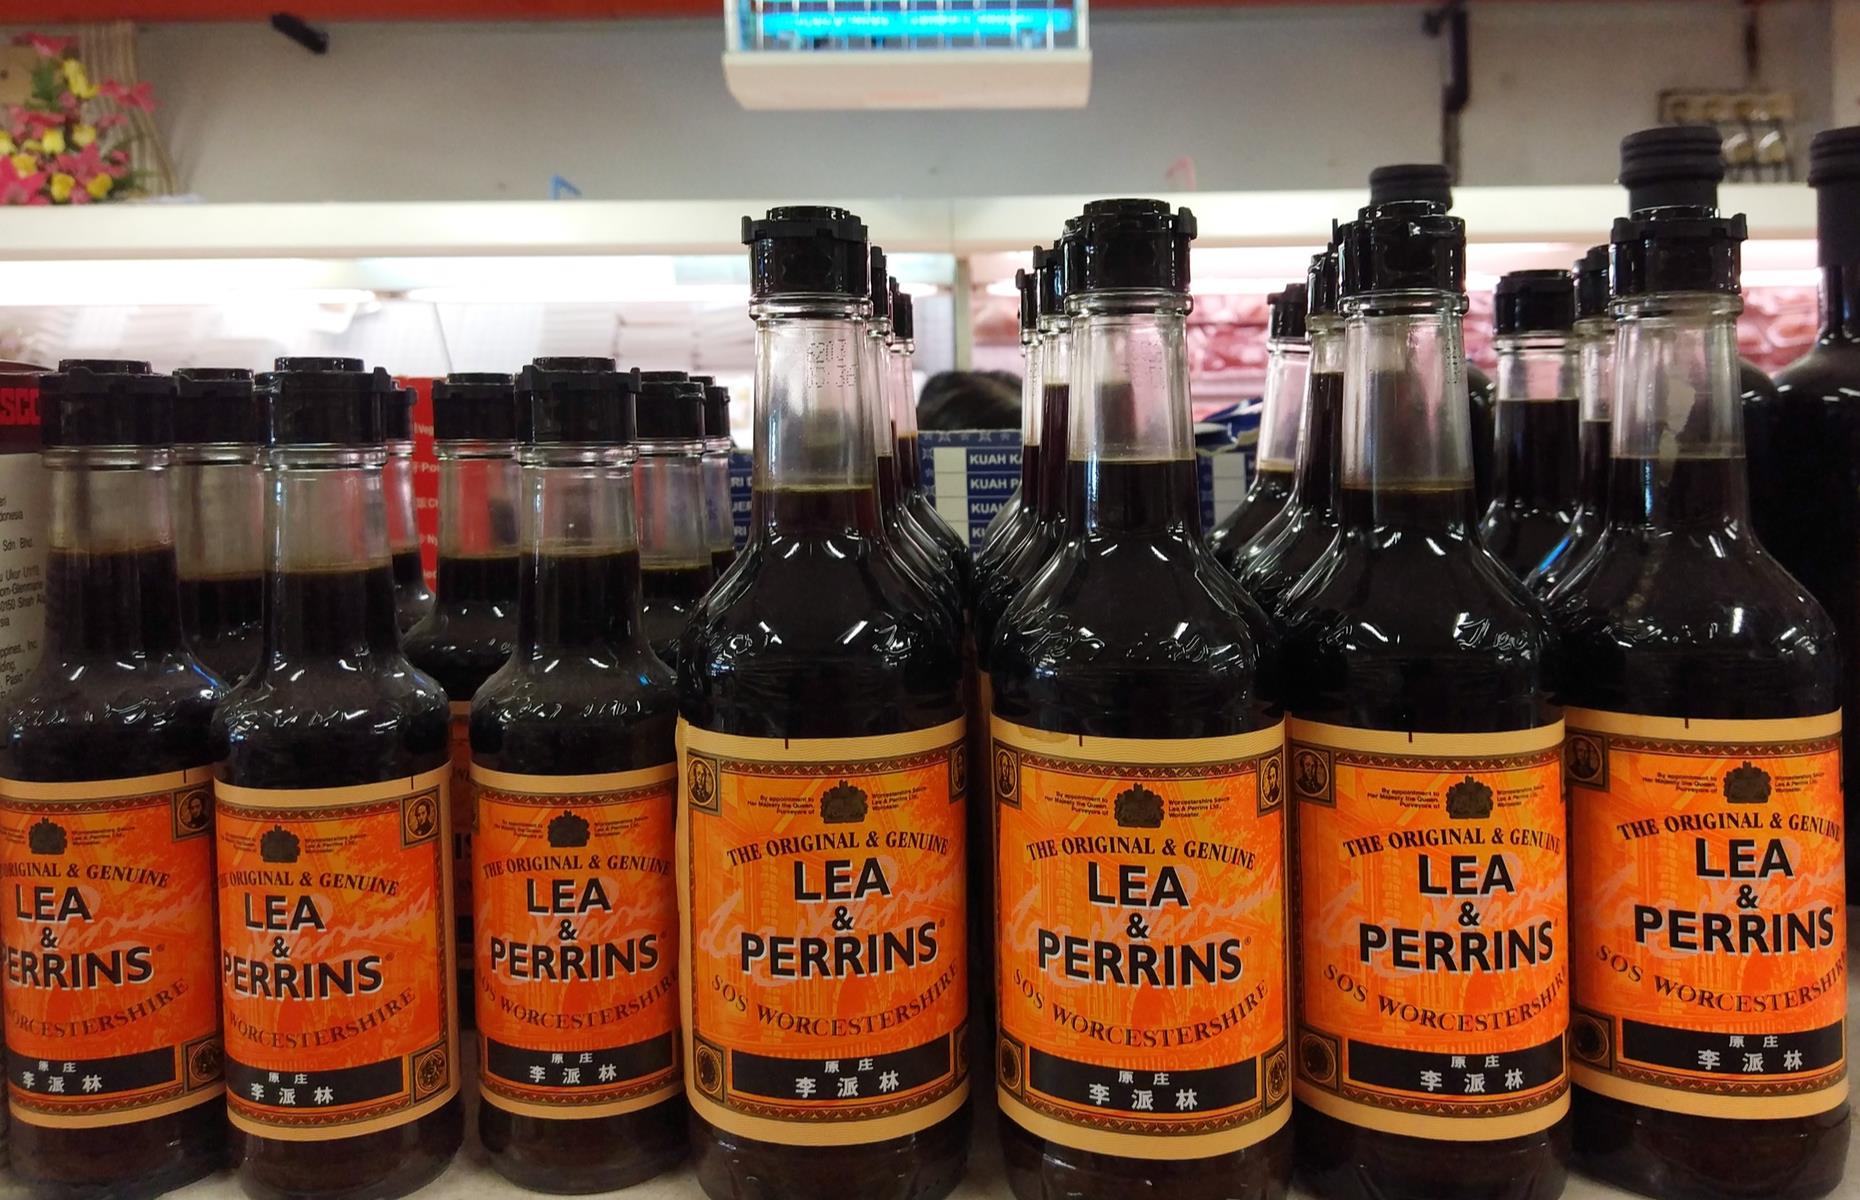 Lea & Perrins was conceived in Worcestershire 